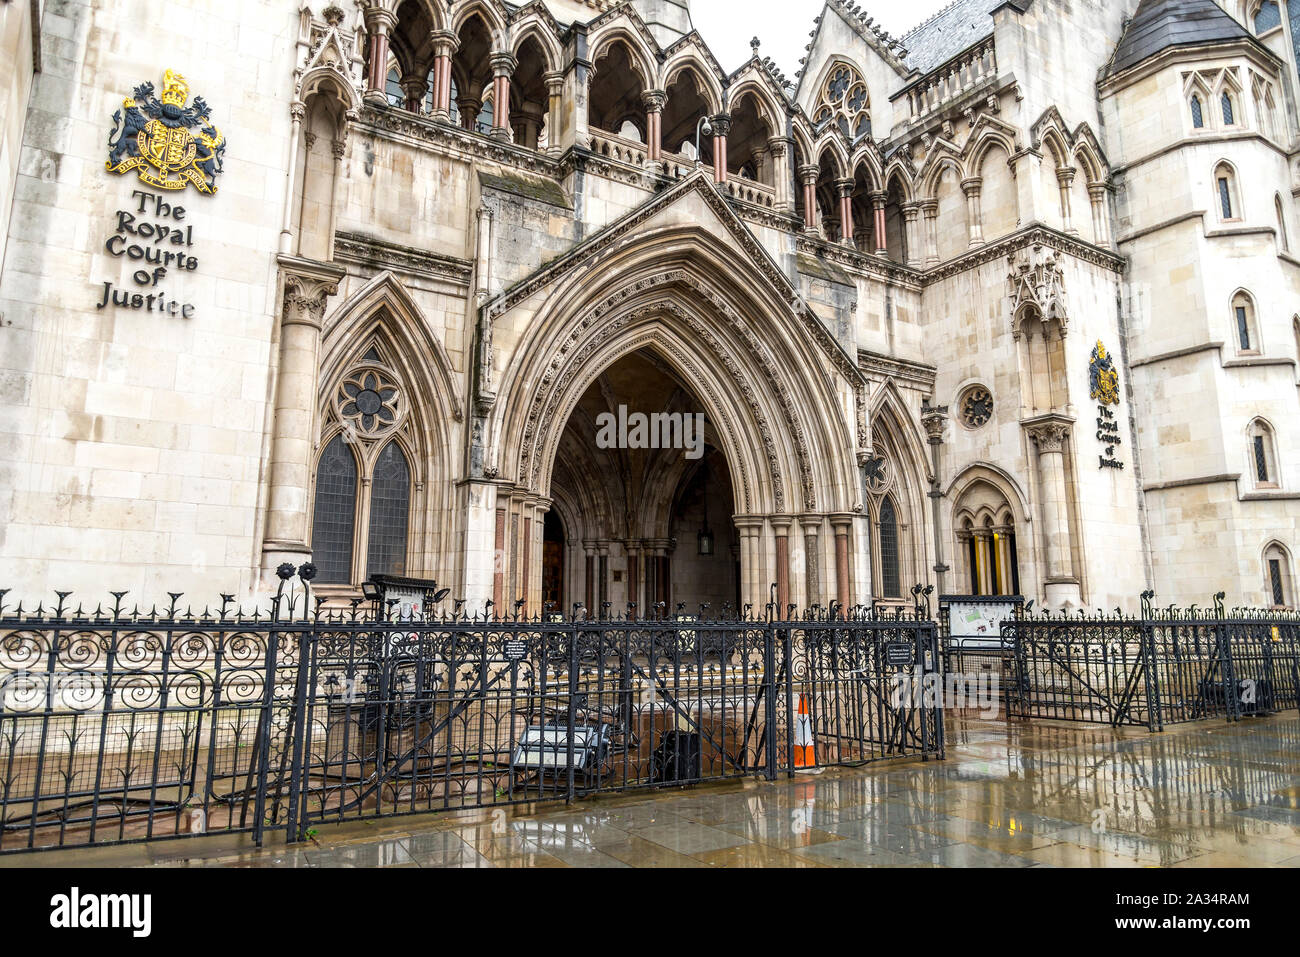 Entrance to the Royal Courts of Justice which house High Court and Court of Appeal, London, United Kingdom Stock Photo